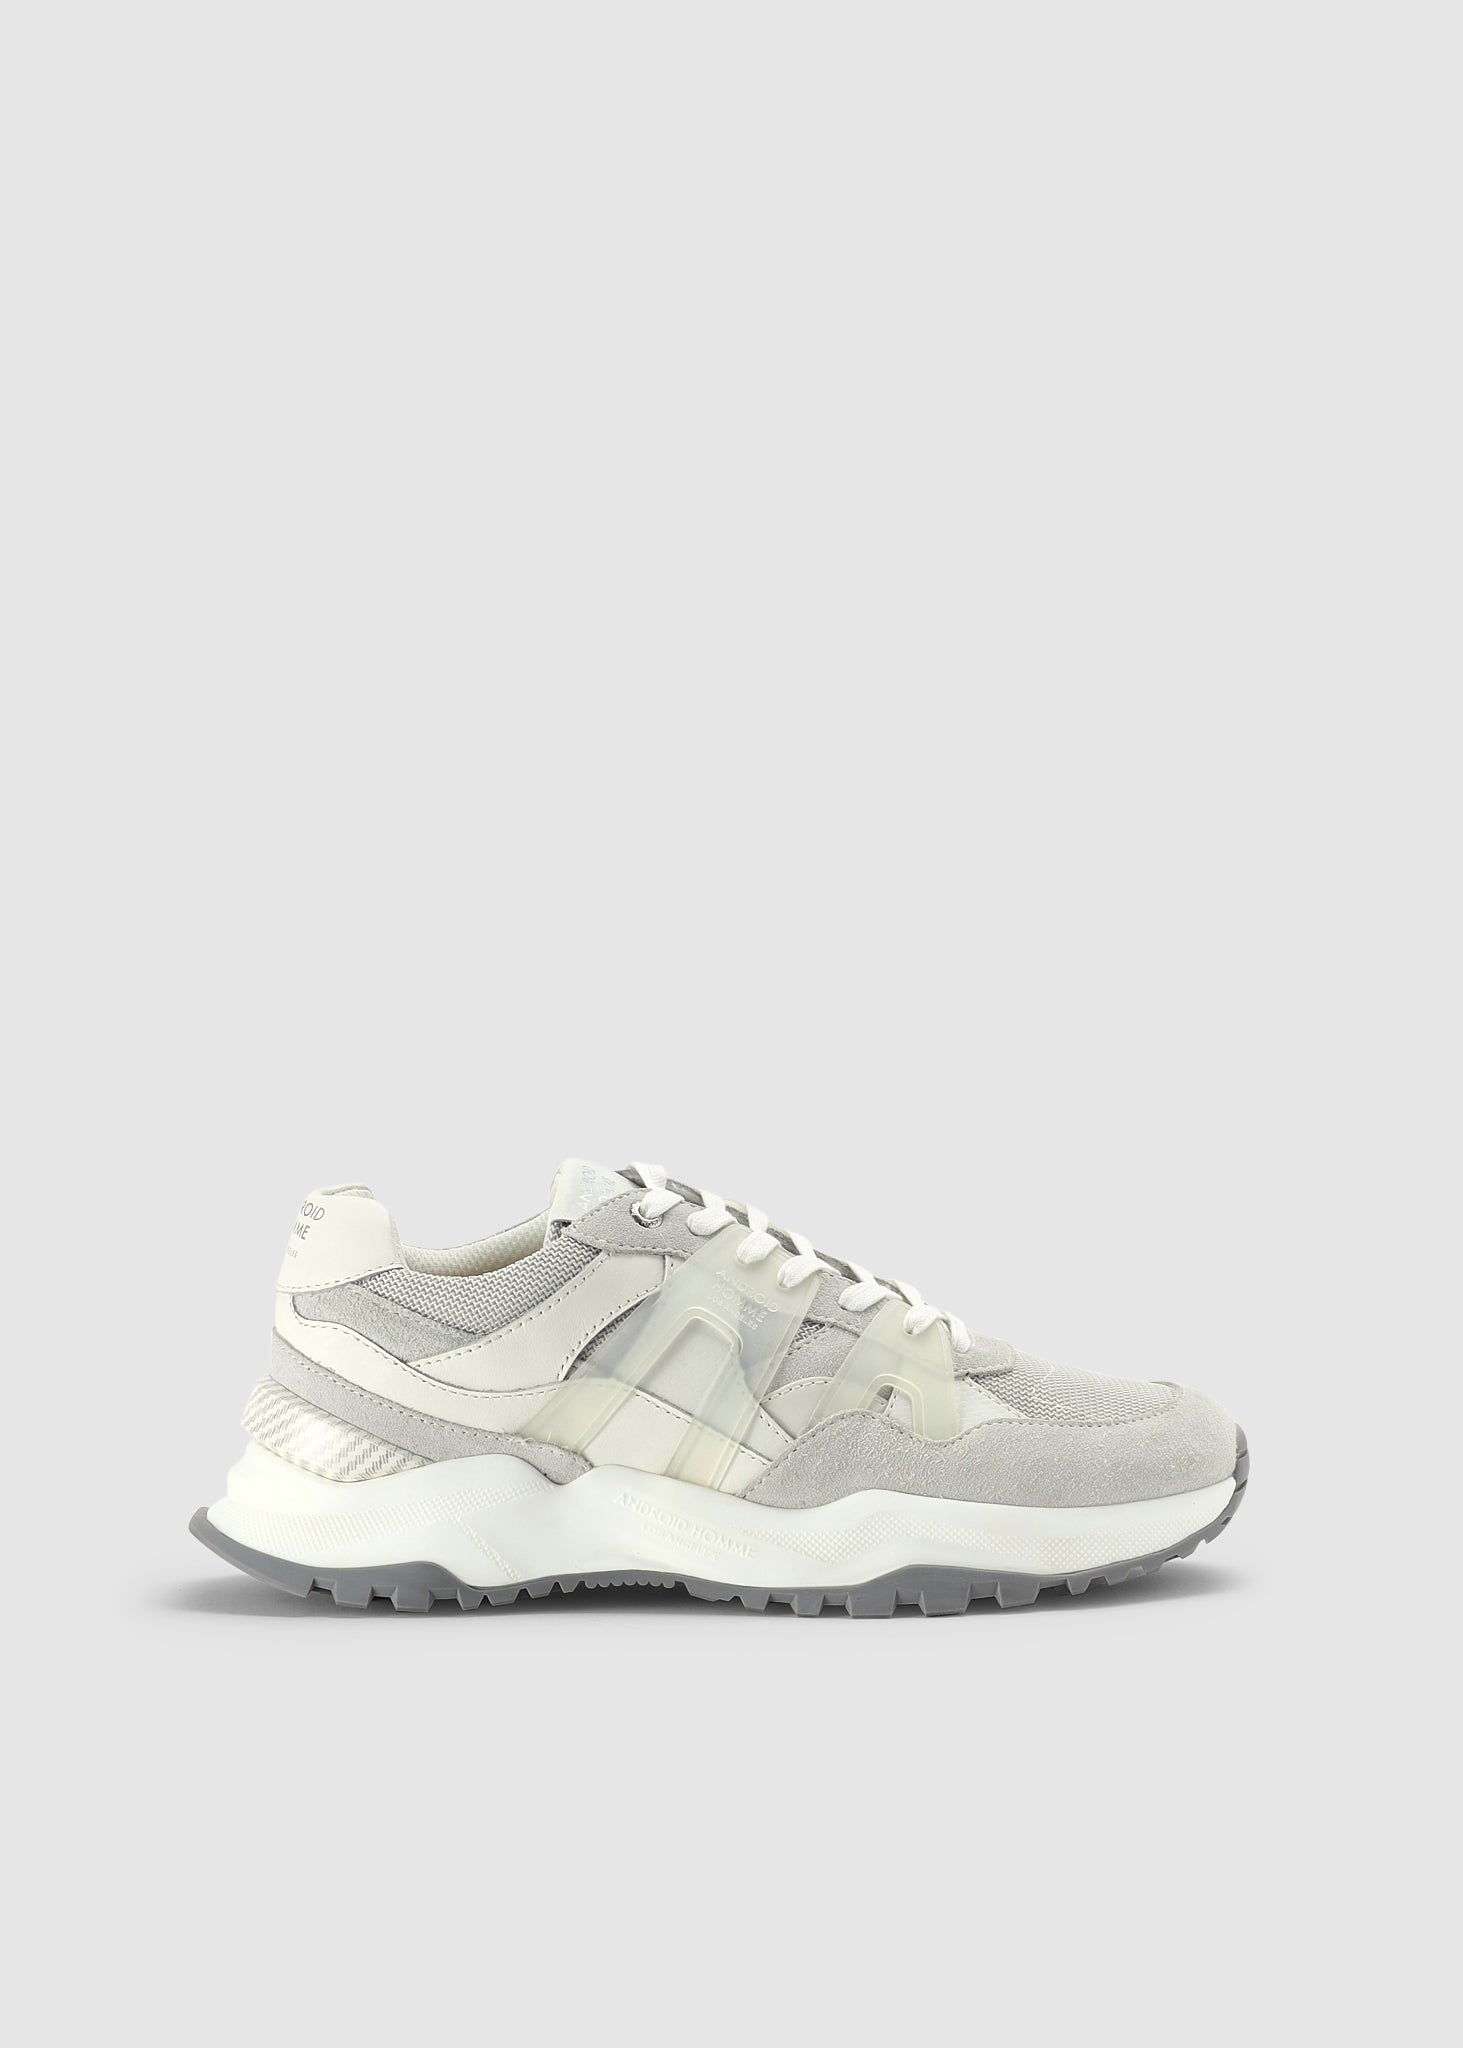 Android Homme Mens Leo Carrillo 2.0 Trainers